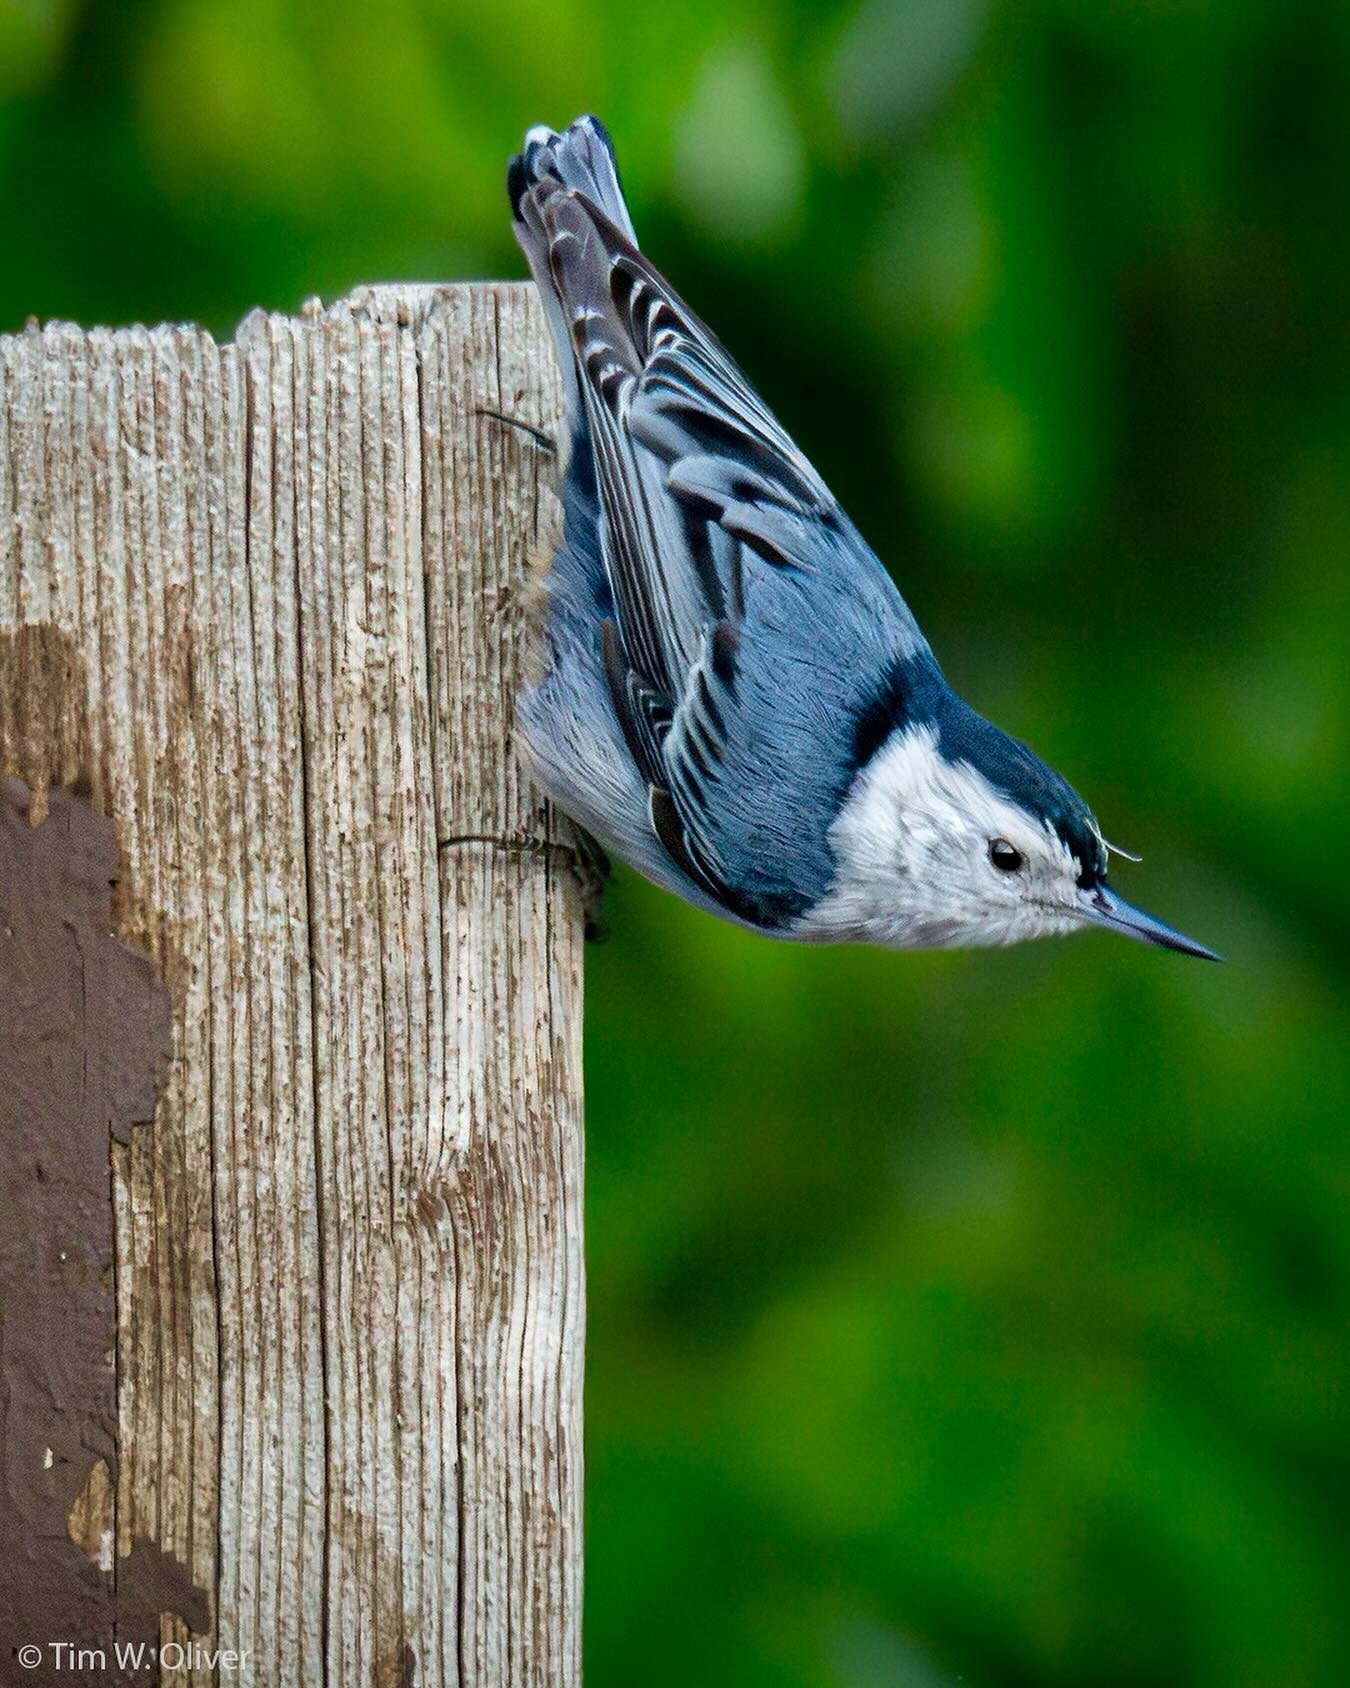 The white-breasted nuthatch is a wonderful little bird that is so interesting to watch.  They move along trees and fences in all directions usually perching upside-down.  If they didn&rsquo;t have feathers I&rsquo;d swear these were lizards or spider